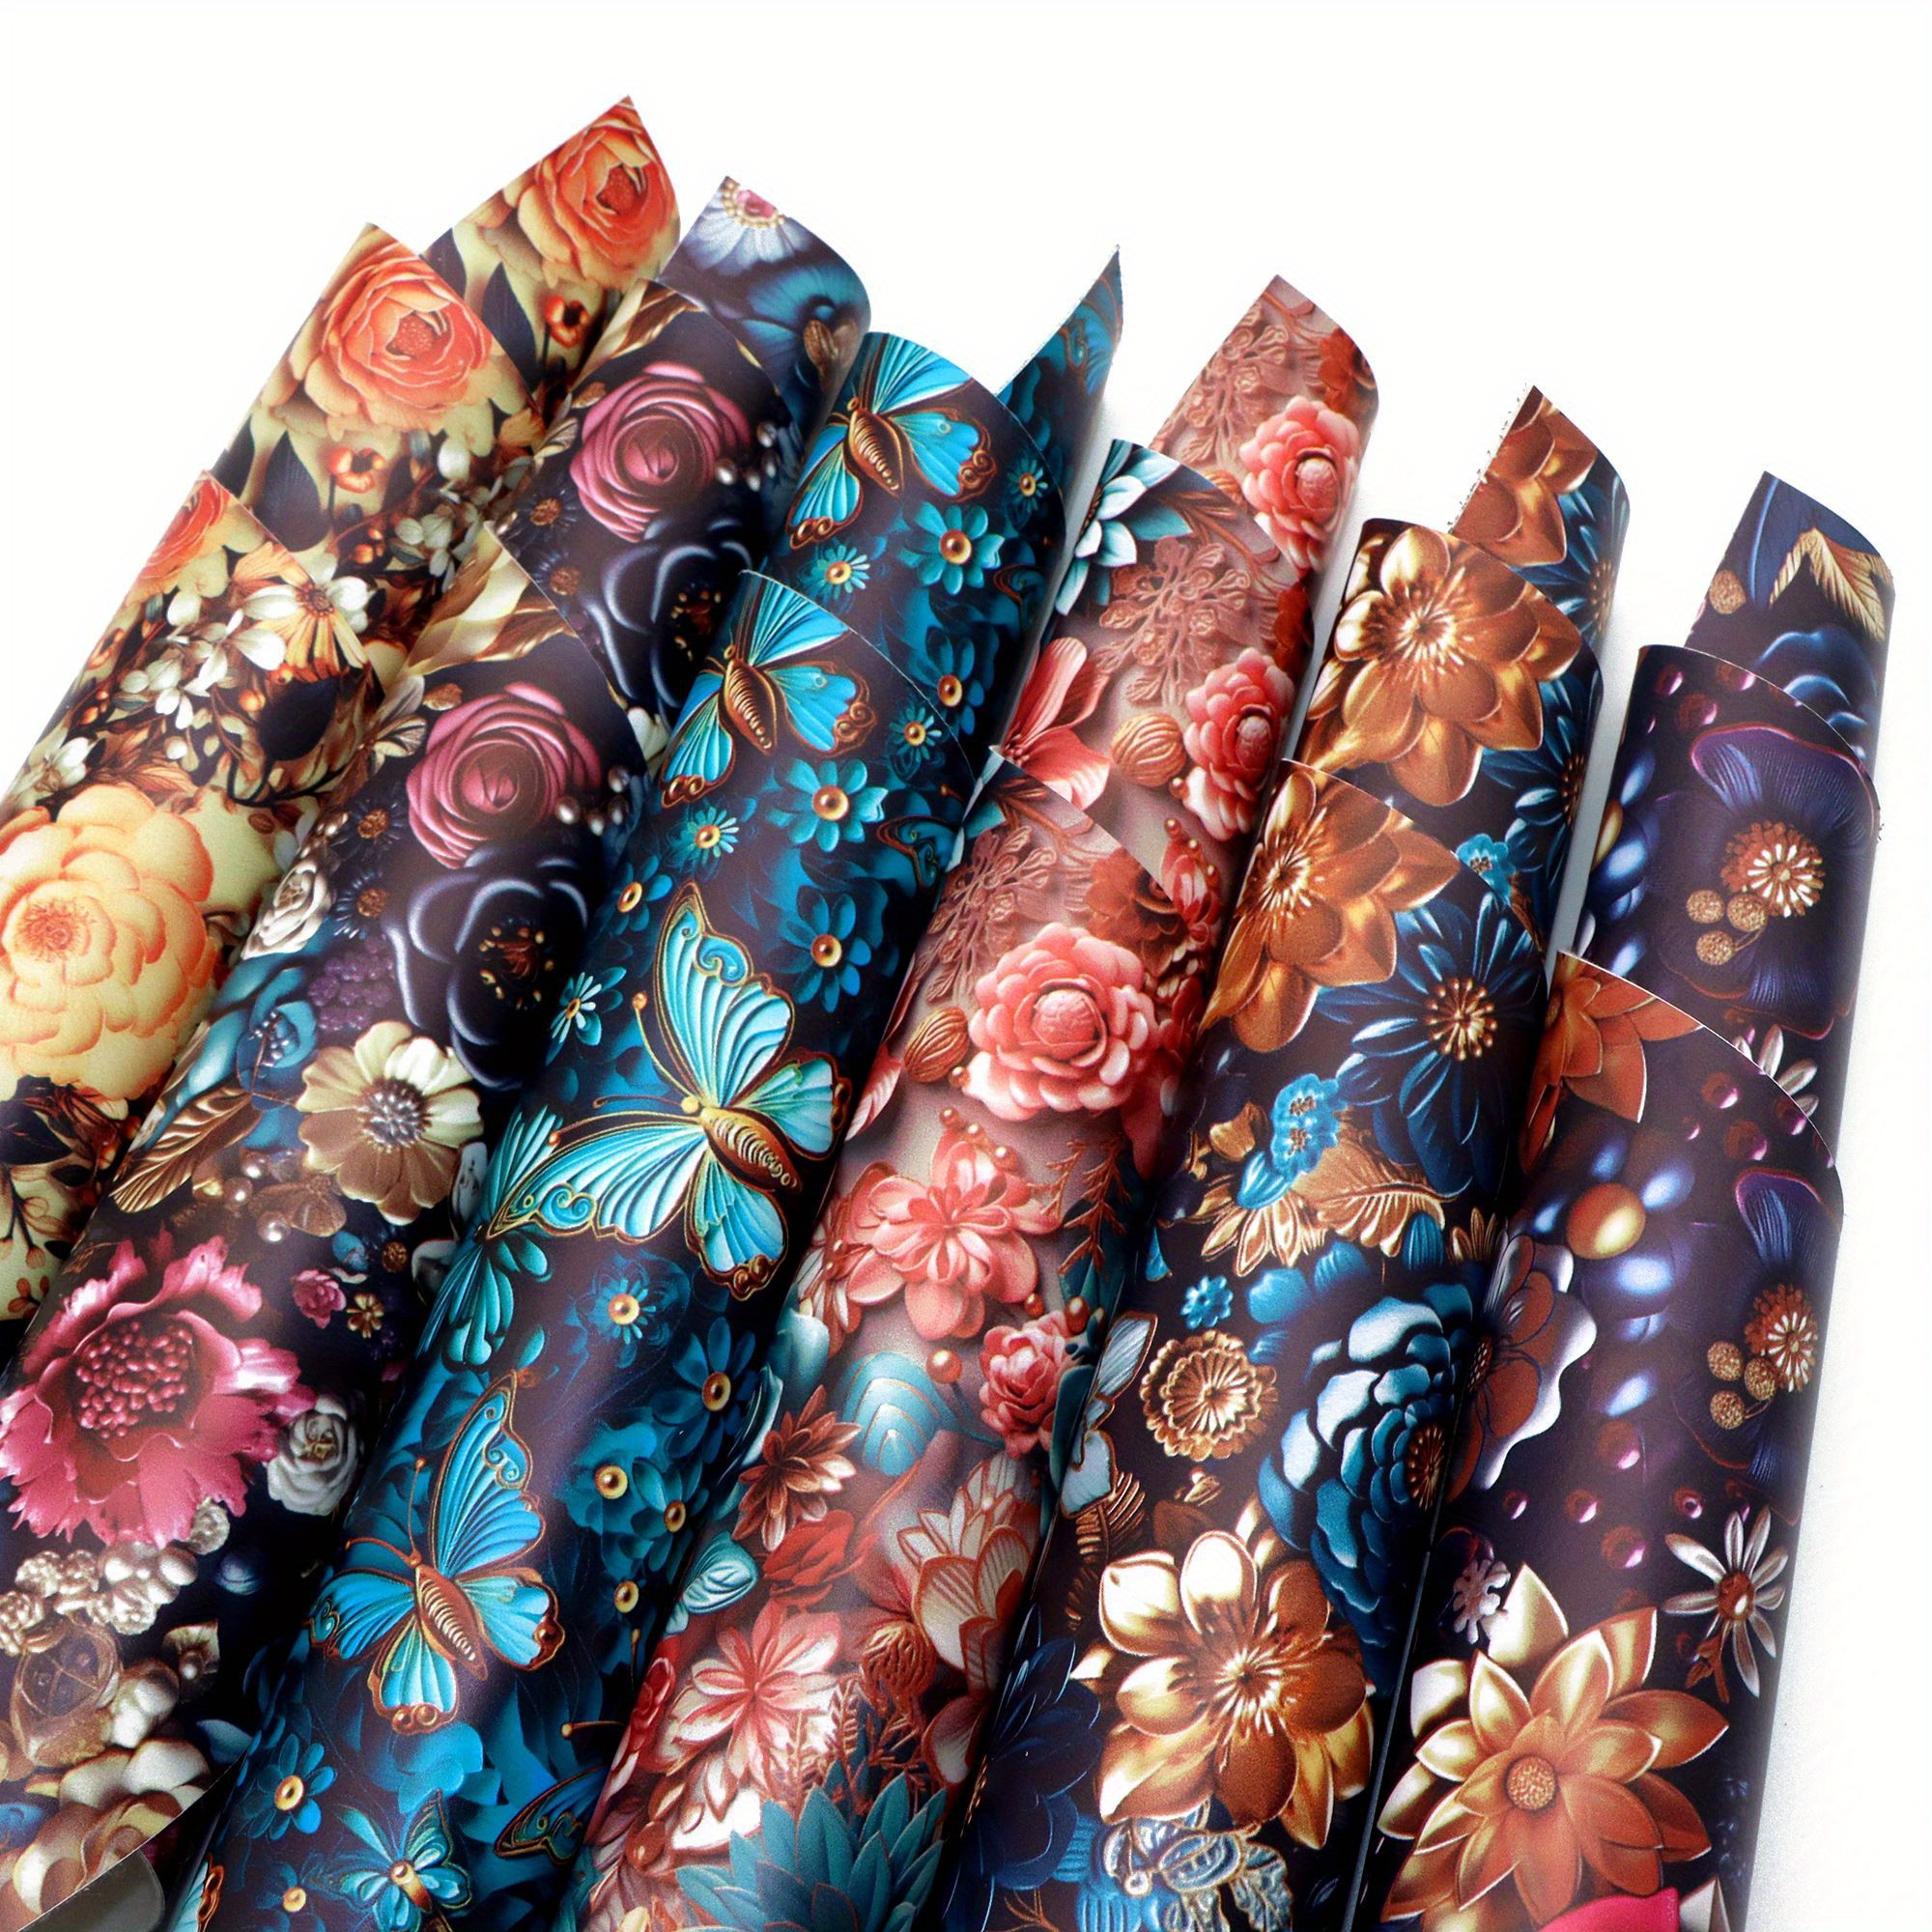 

1roll 11.8x55.1in Smooth Textured Faux Leather Sheet 3d Scene Flowers Floral Dragonfly Printed Synthetic Leather Fabric Roll For Diy Earrings Hair Bows Crafts Projects Supply